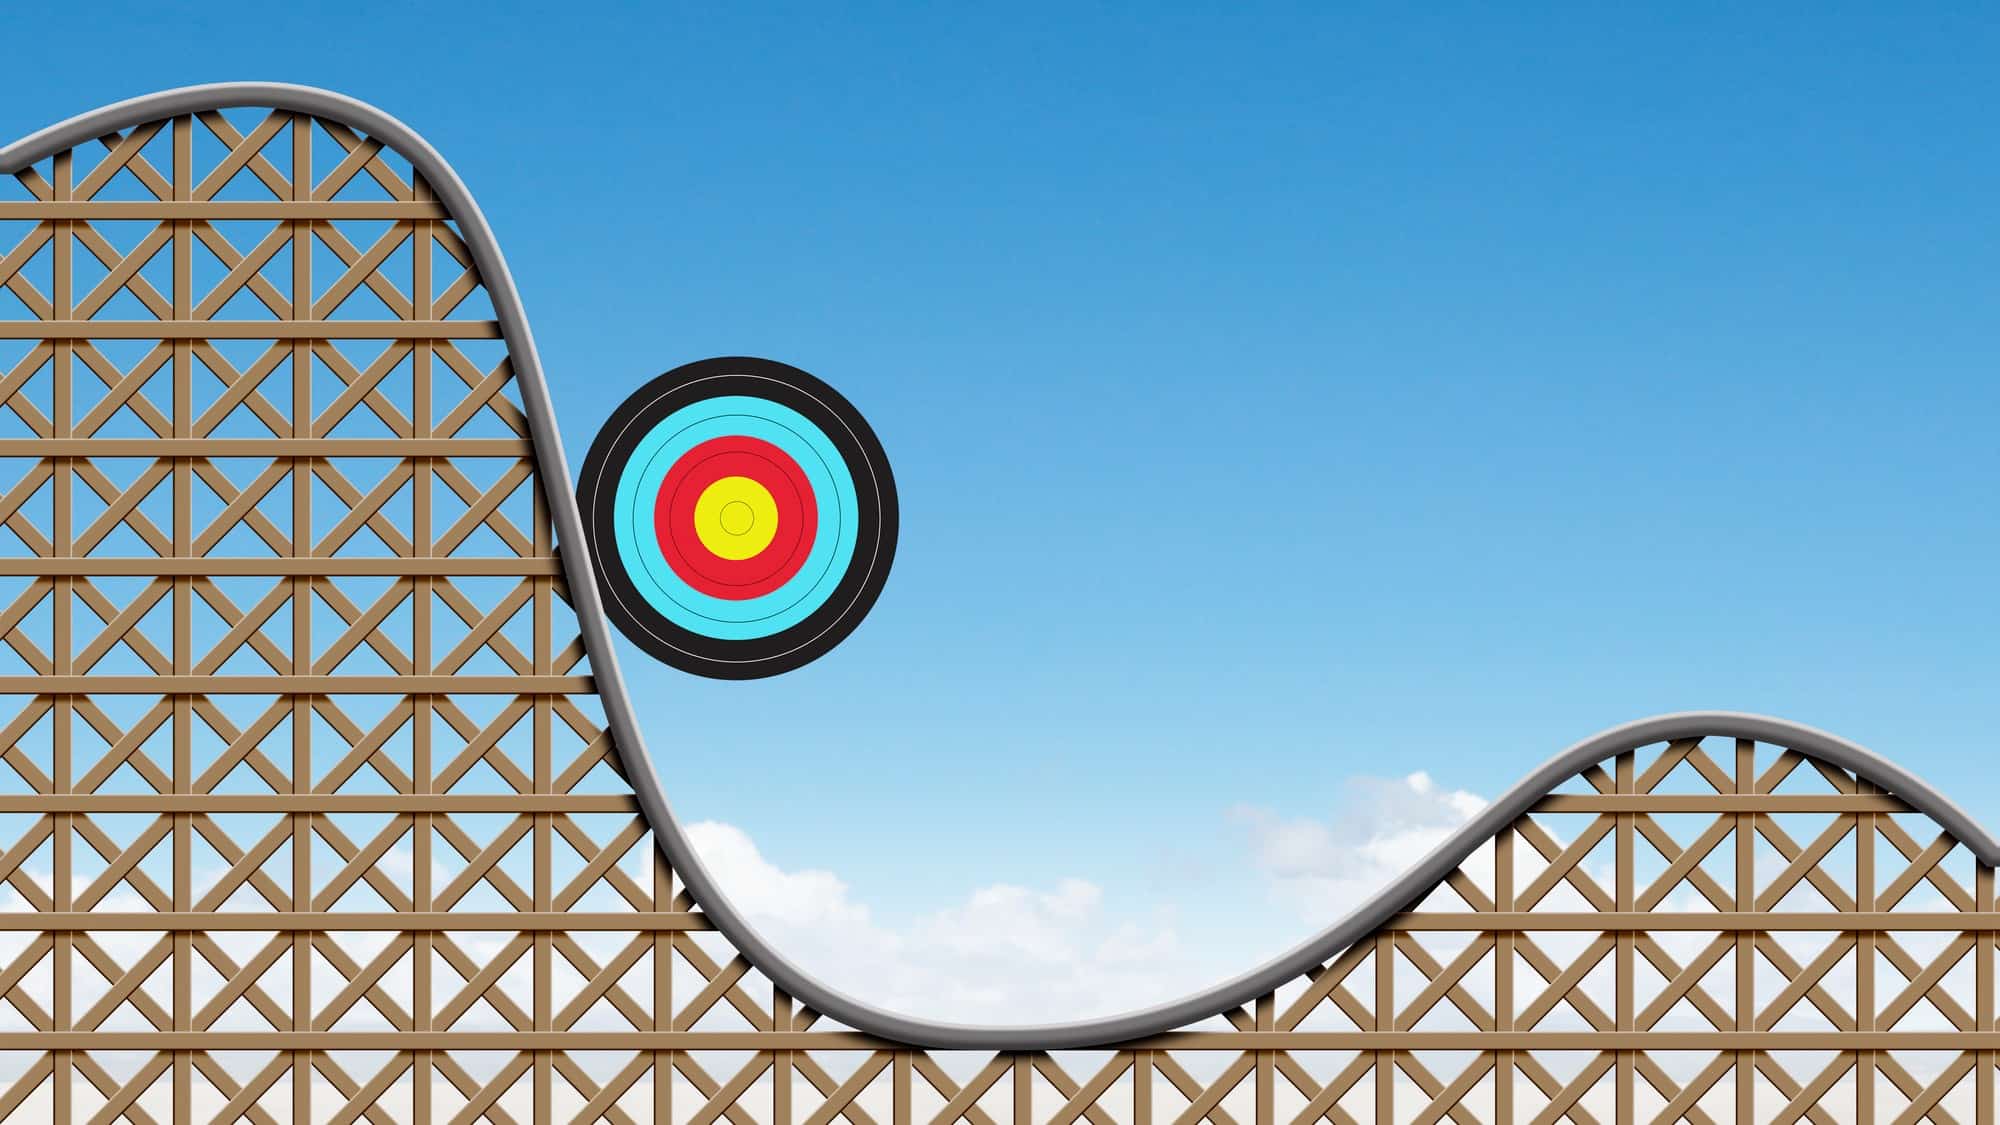 Target circle going down on a rollercoaster, symbolising volatility.